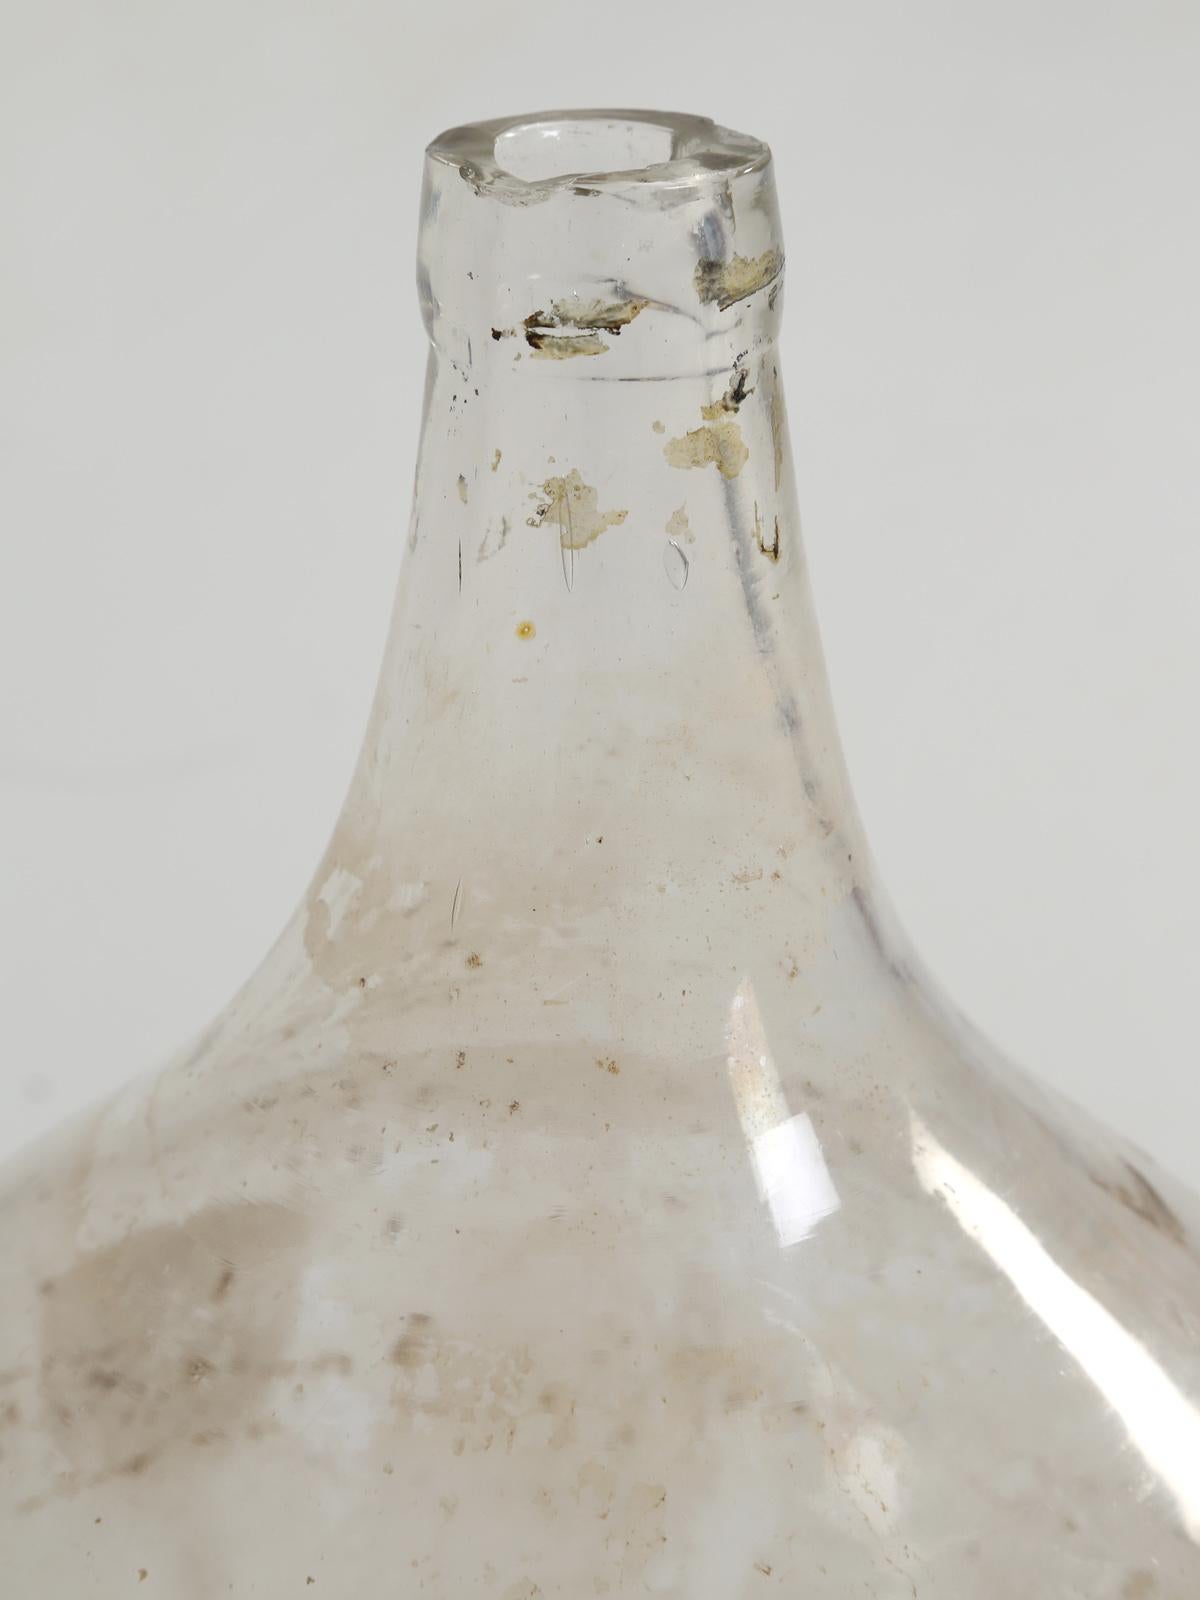 Country Antique Demijohn or Carboy